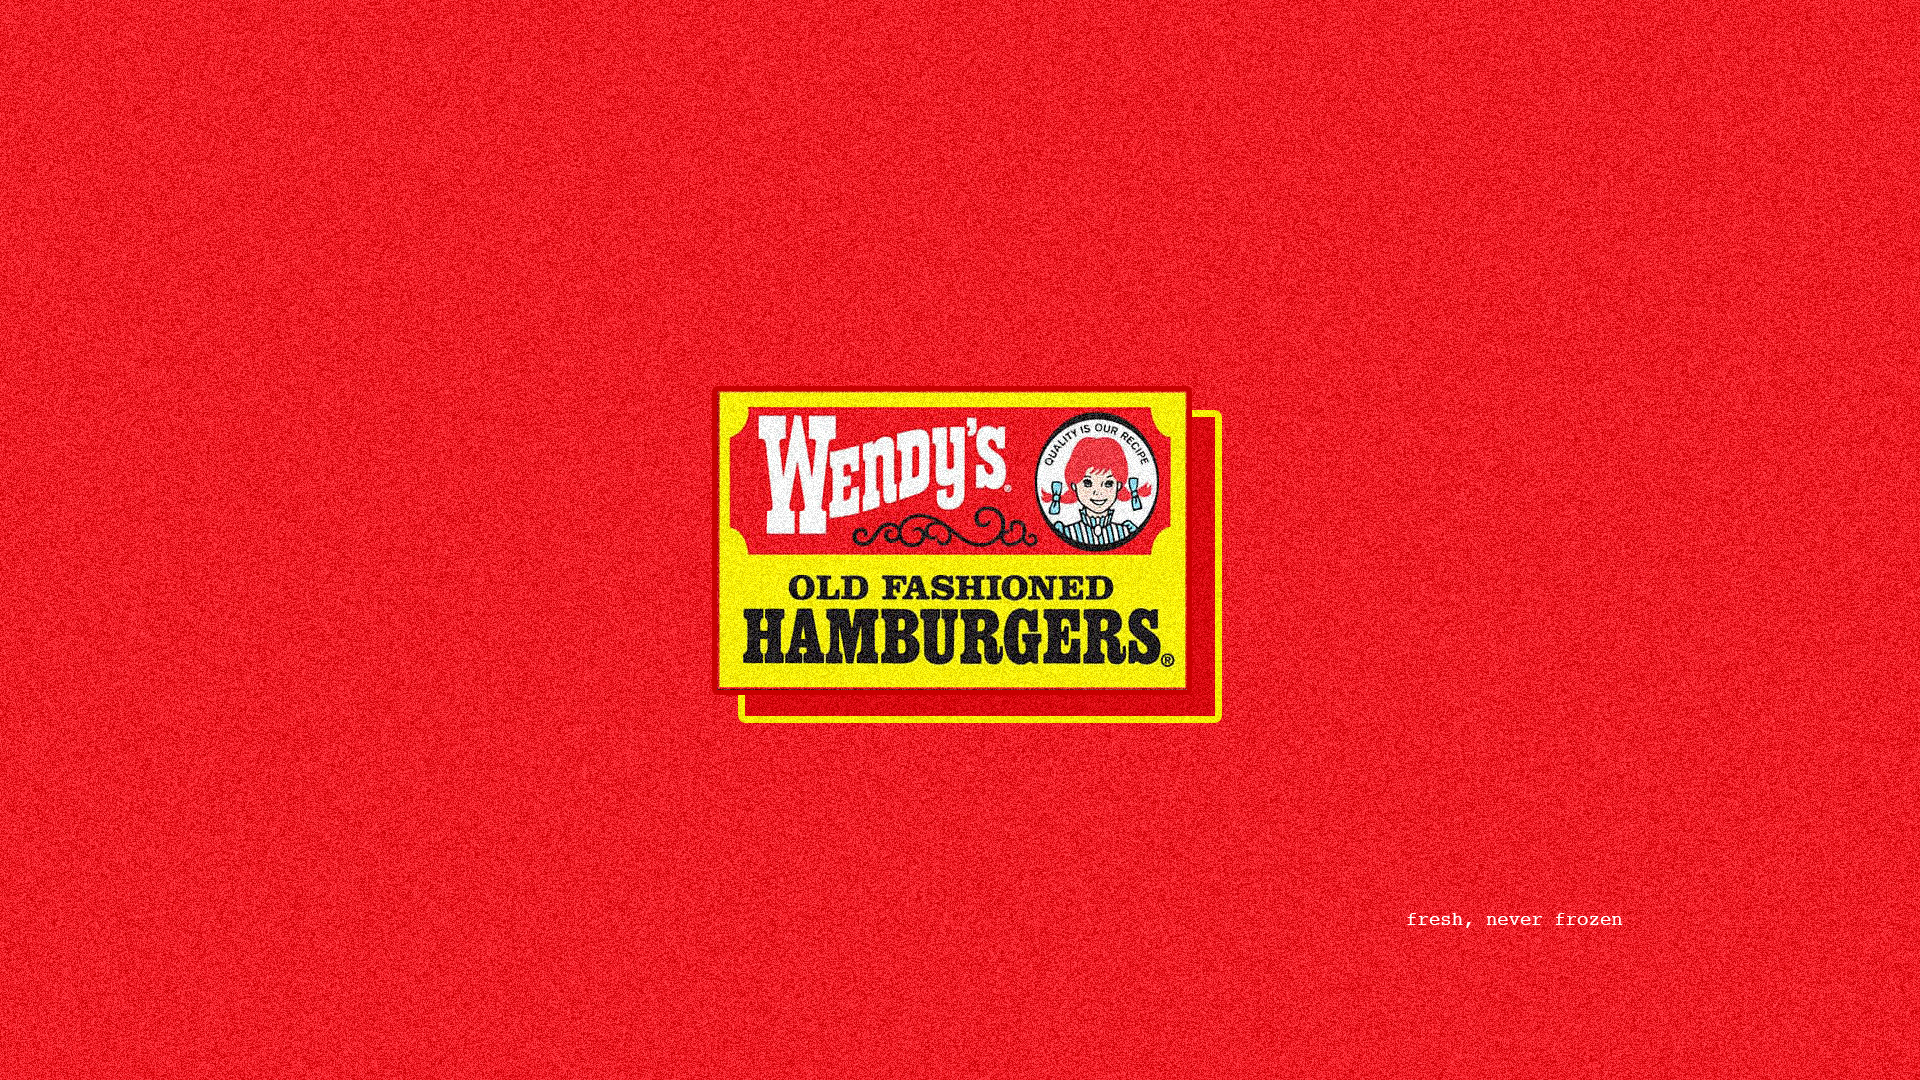 General 1920x1080 Wendy's logo brand fast food burgers red background red